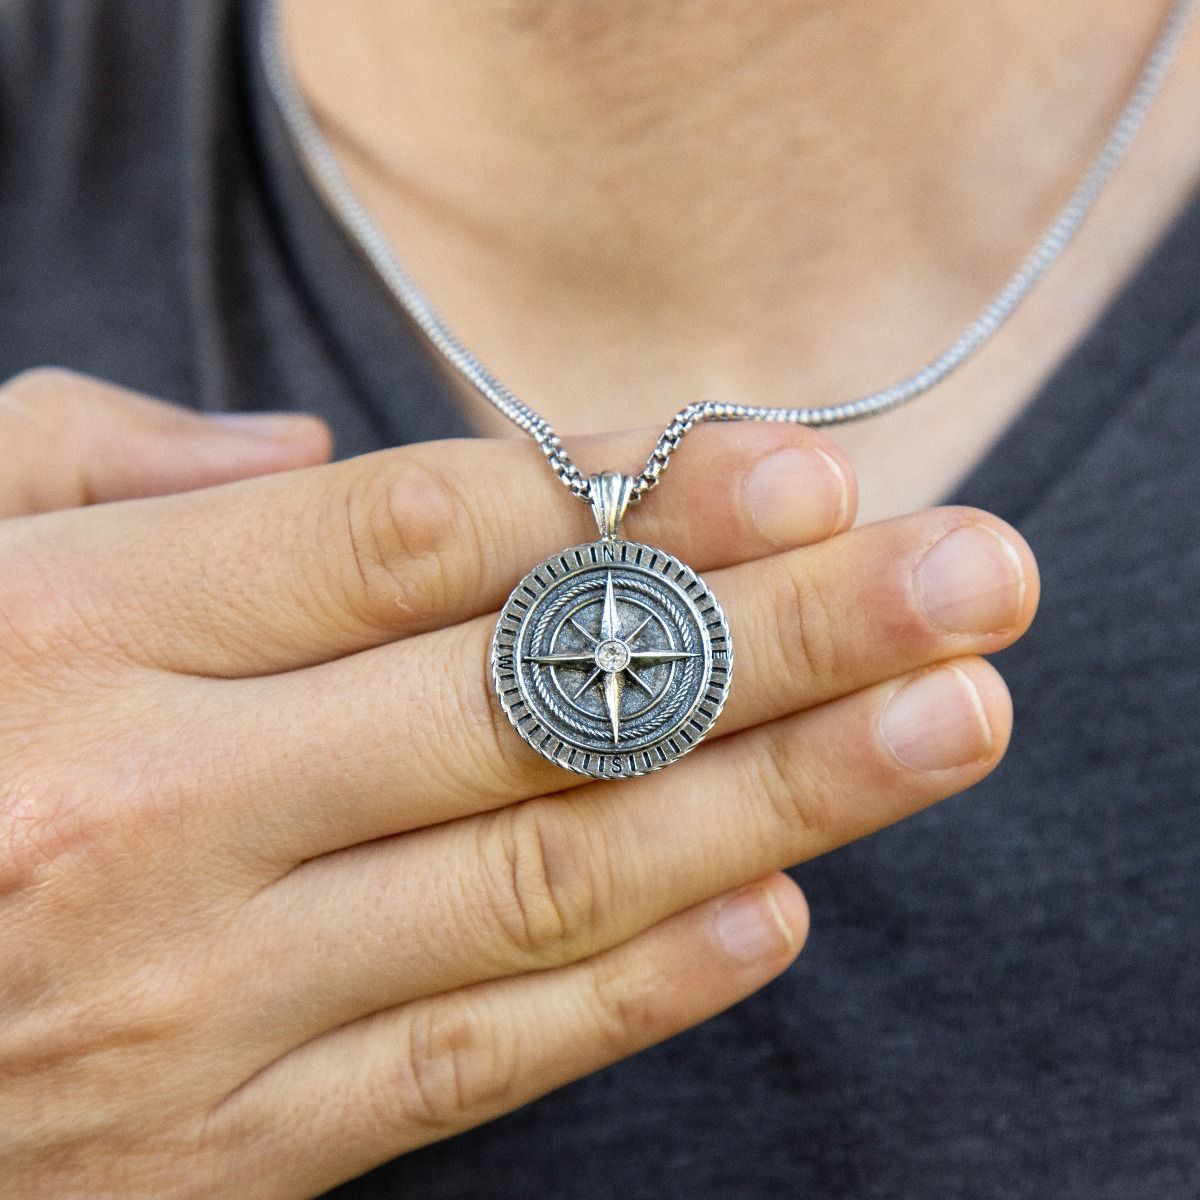 Compass Necklace Gift for Men/Wife, I'd Be Lost Without You Valentines Day,  Compass Pendants Male Jewelry for Her, Romantic Anniversary Birthday Gift  Ideas (Gold Compass-23.6in Chain) : Amazon.in: Fashion